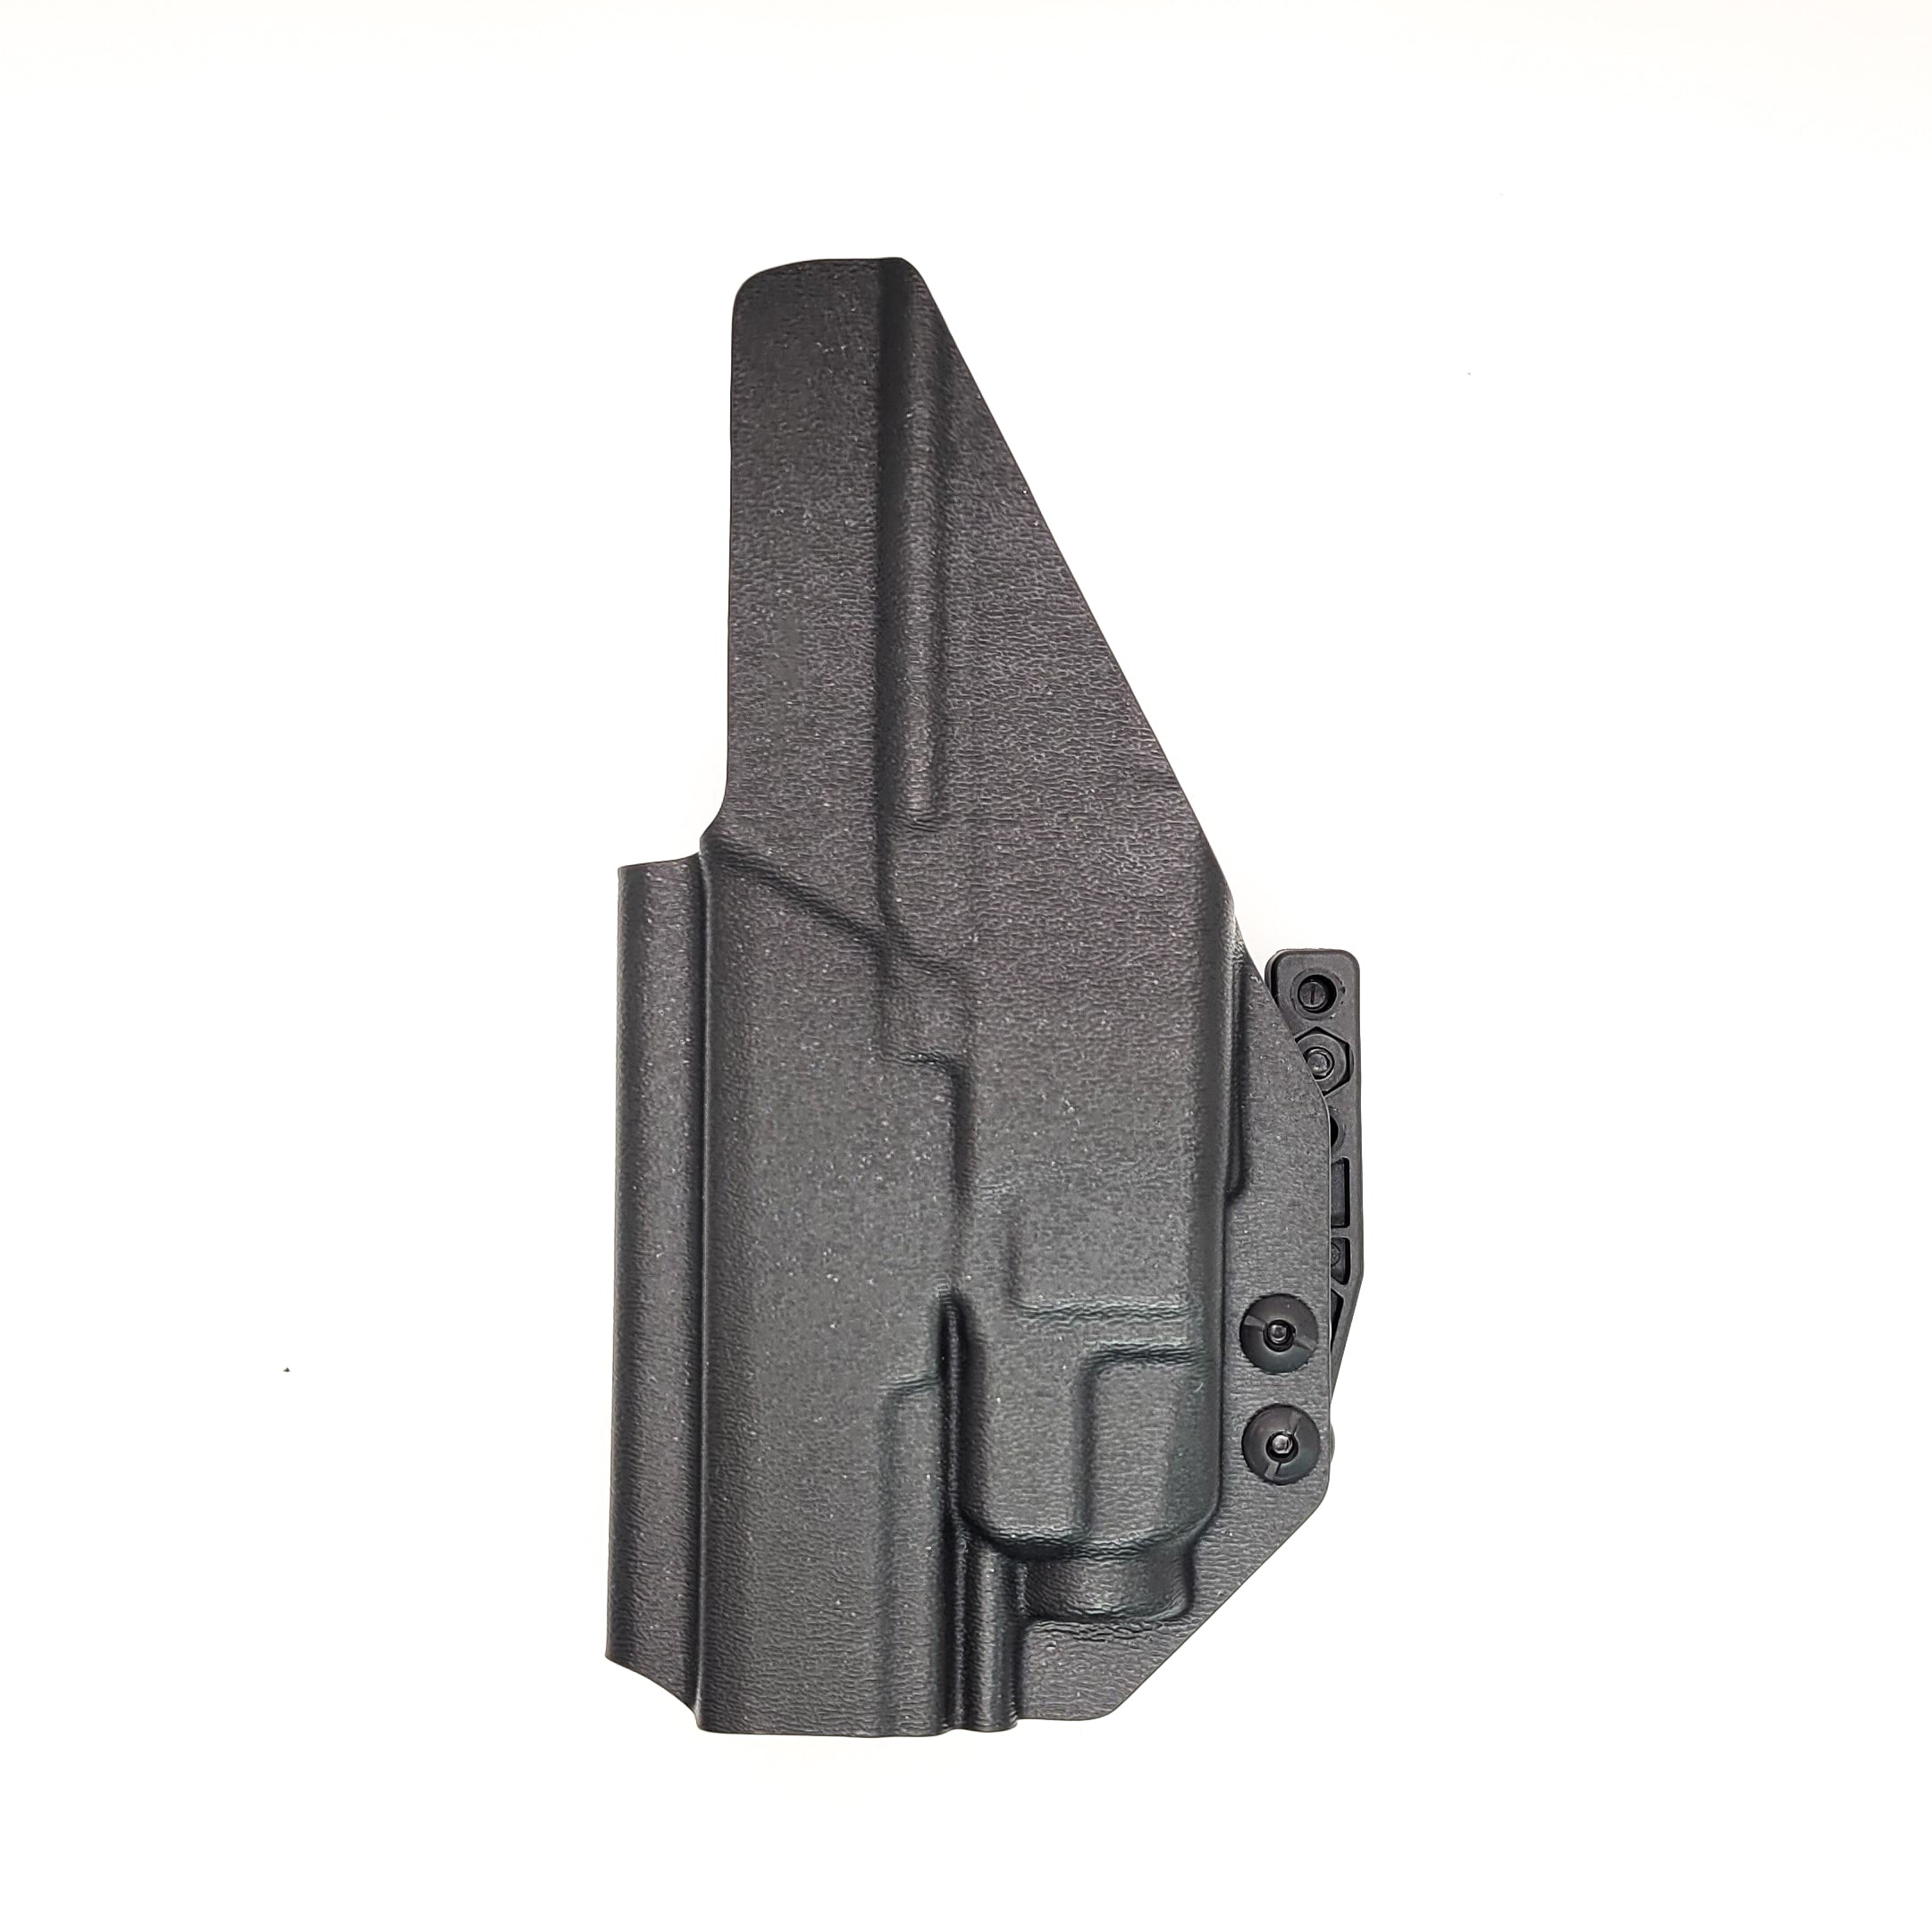 For the best concealed carry Inside Waistband IWB AIWB Holster designed to fit the Walther PDP Pro SD Compact 4" pistol and Streamlight TLR-7A or TLR-7 mounted on the firearm, shop Four Brothers Holsters. Cut for red dot sight, full sweat guard, adjustable retention & open muzzle for threaded barrels & compensators. 